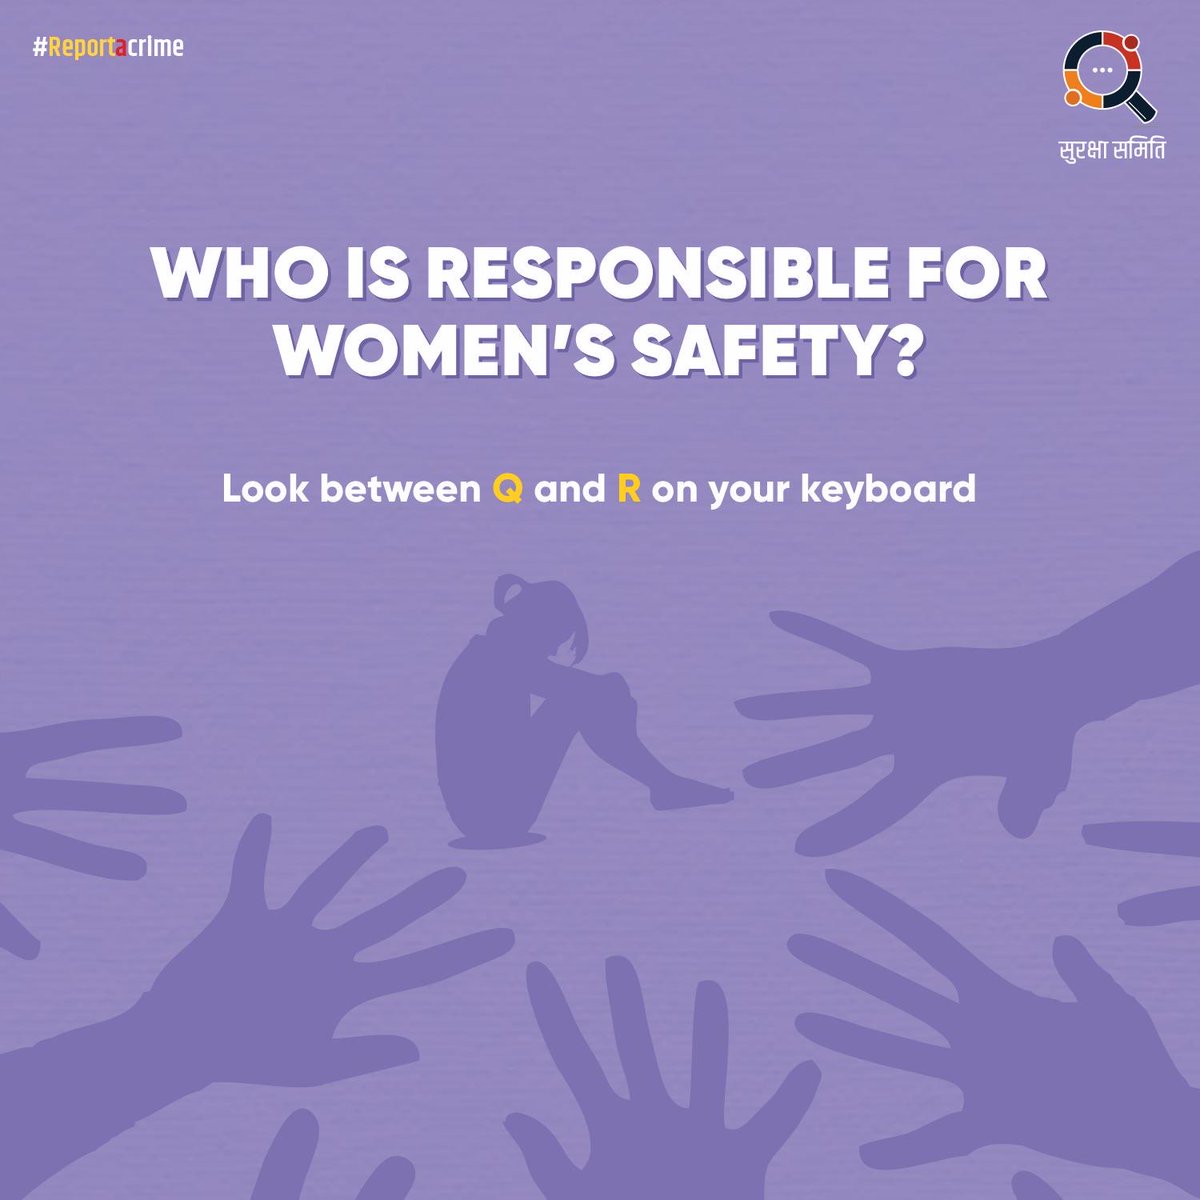 Nagpurkar It's OUR responsibility to create a safe environment for women! 💪

Join us in creating a safer world for women! Take action today.

#surakshasamiti #Reportacrime #WomenSafetyFirst #nagpur #nagpurcity #nagpurcrime #SafetyForAll